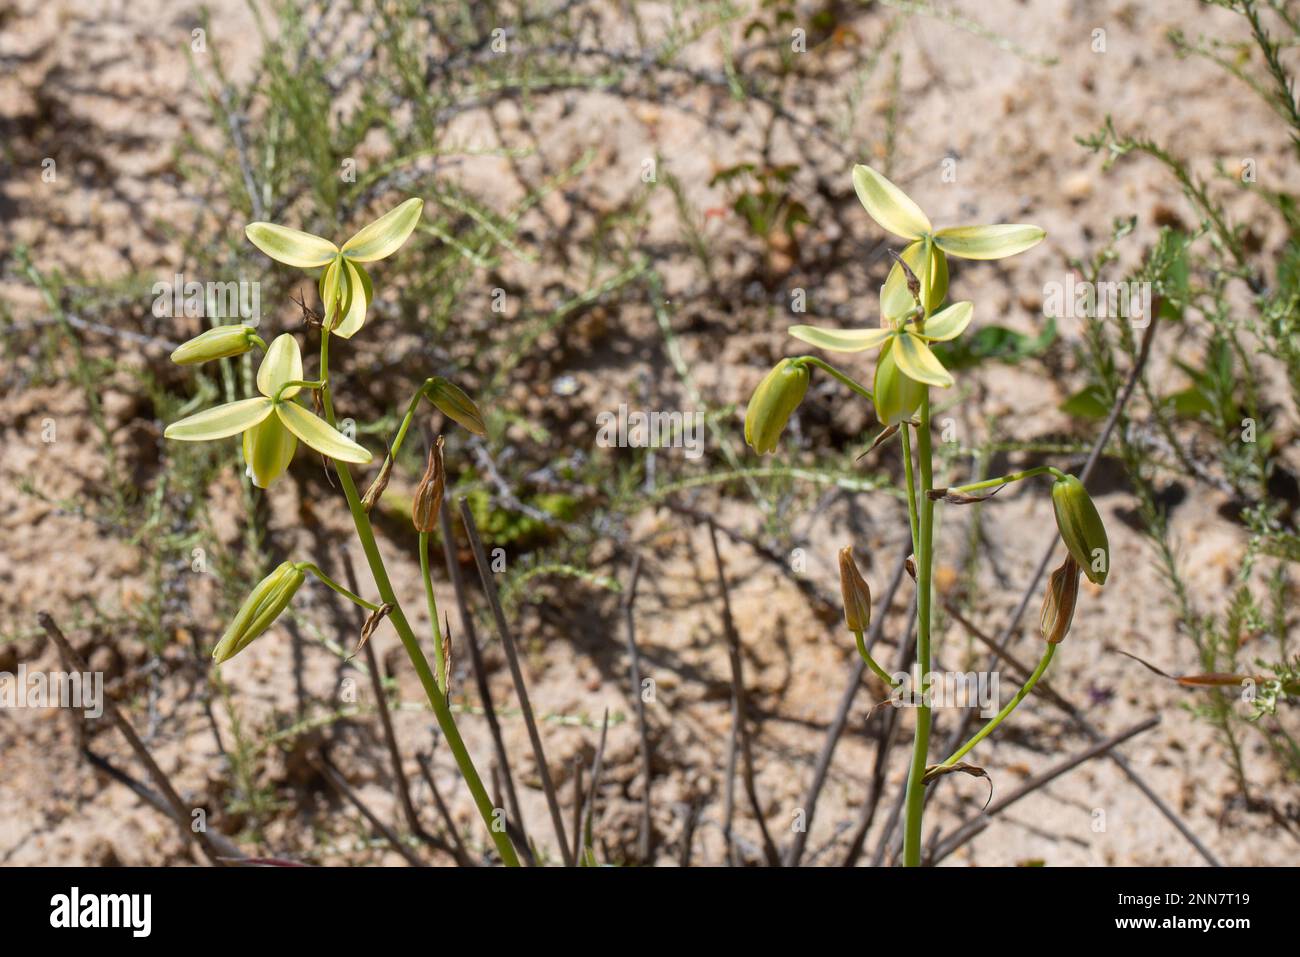 Albuca sp. taken near Piketberg in the Western Cape of South Africa Stock Photo